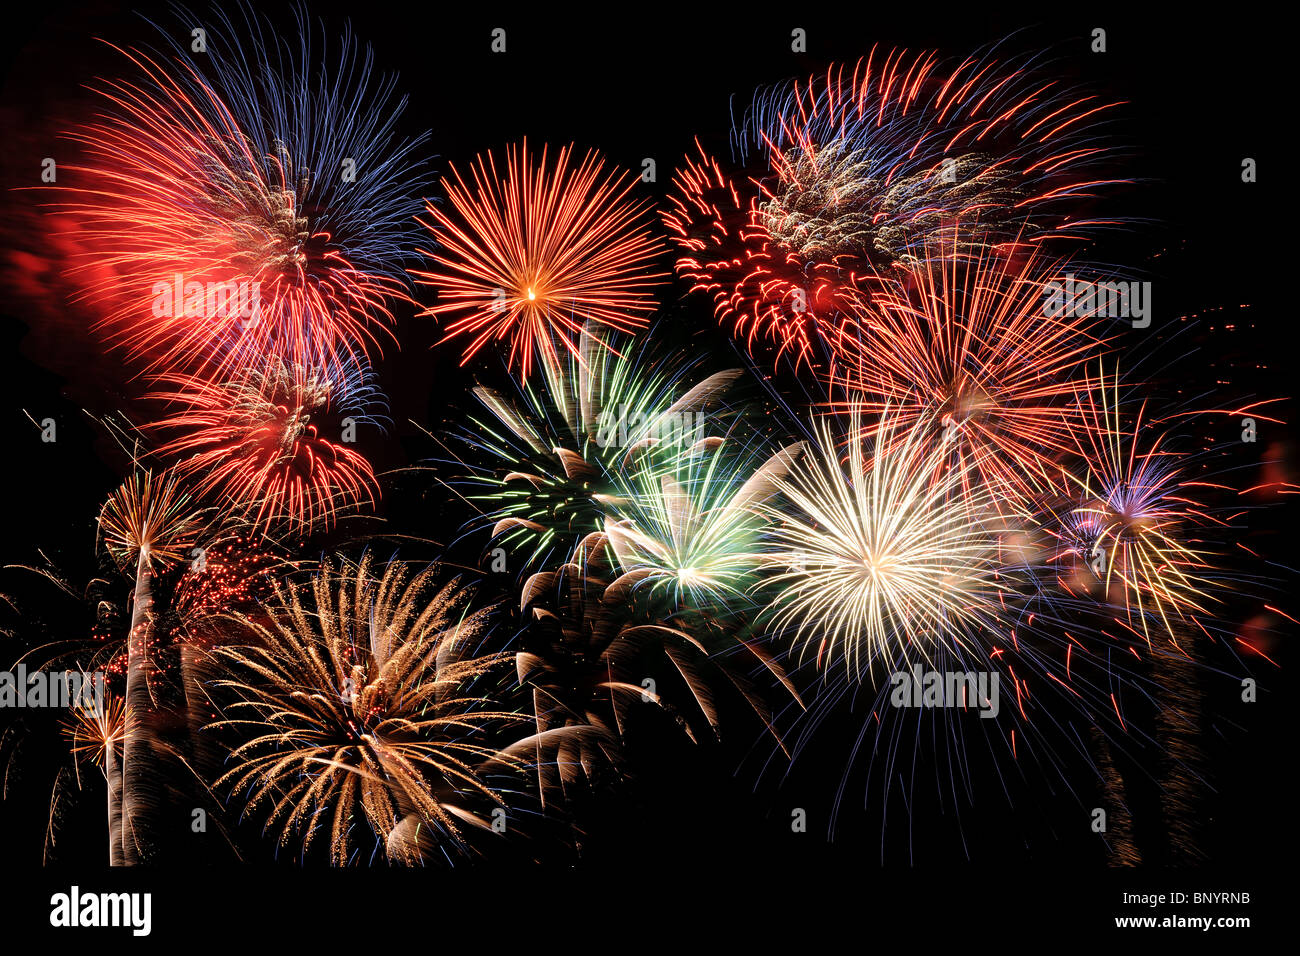 Bright and colorful fireworks exploding in the night sky Stock Photo